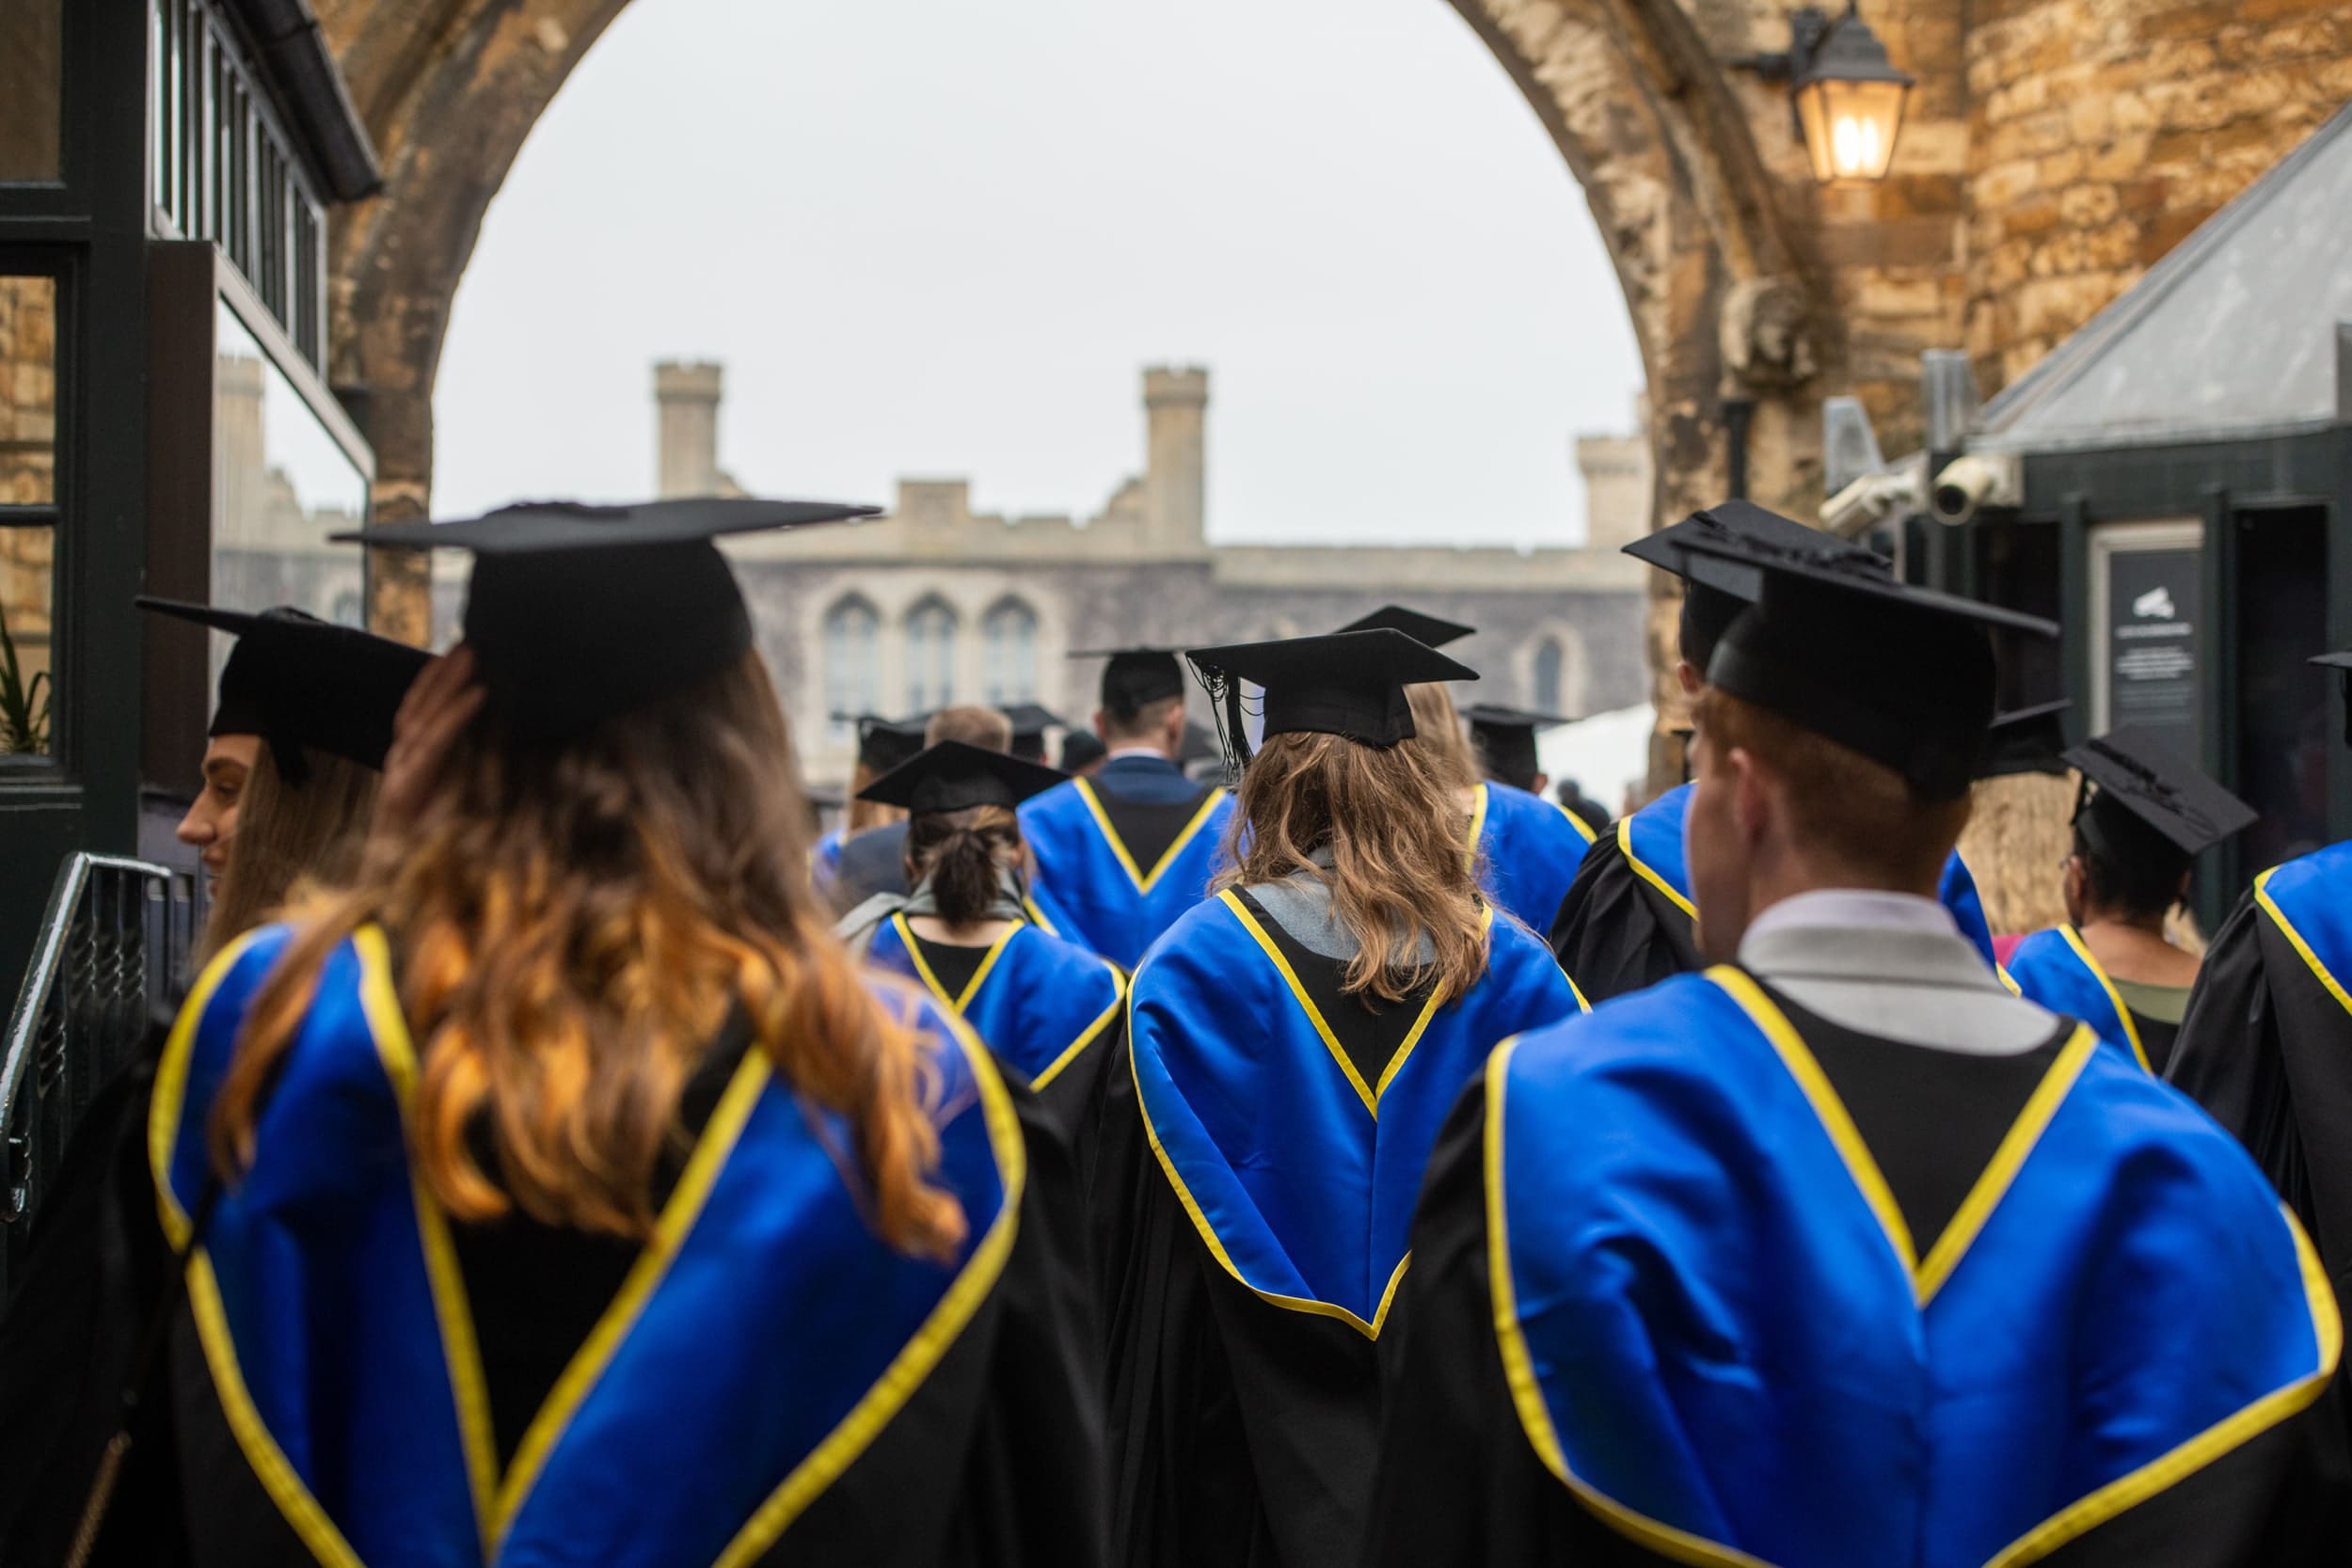 Students in graduation caps, gowns, and hoods, walking into the grounds of Lincoln Castle